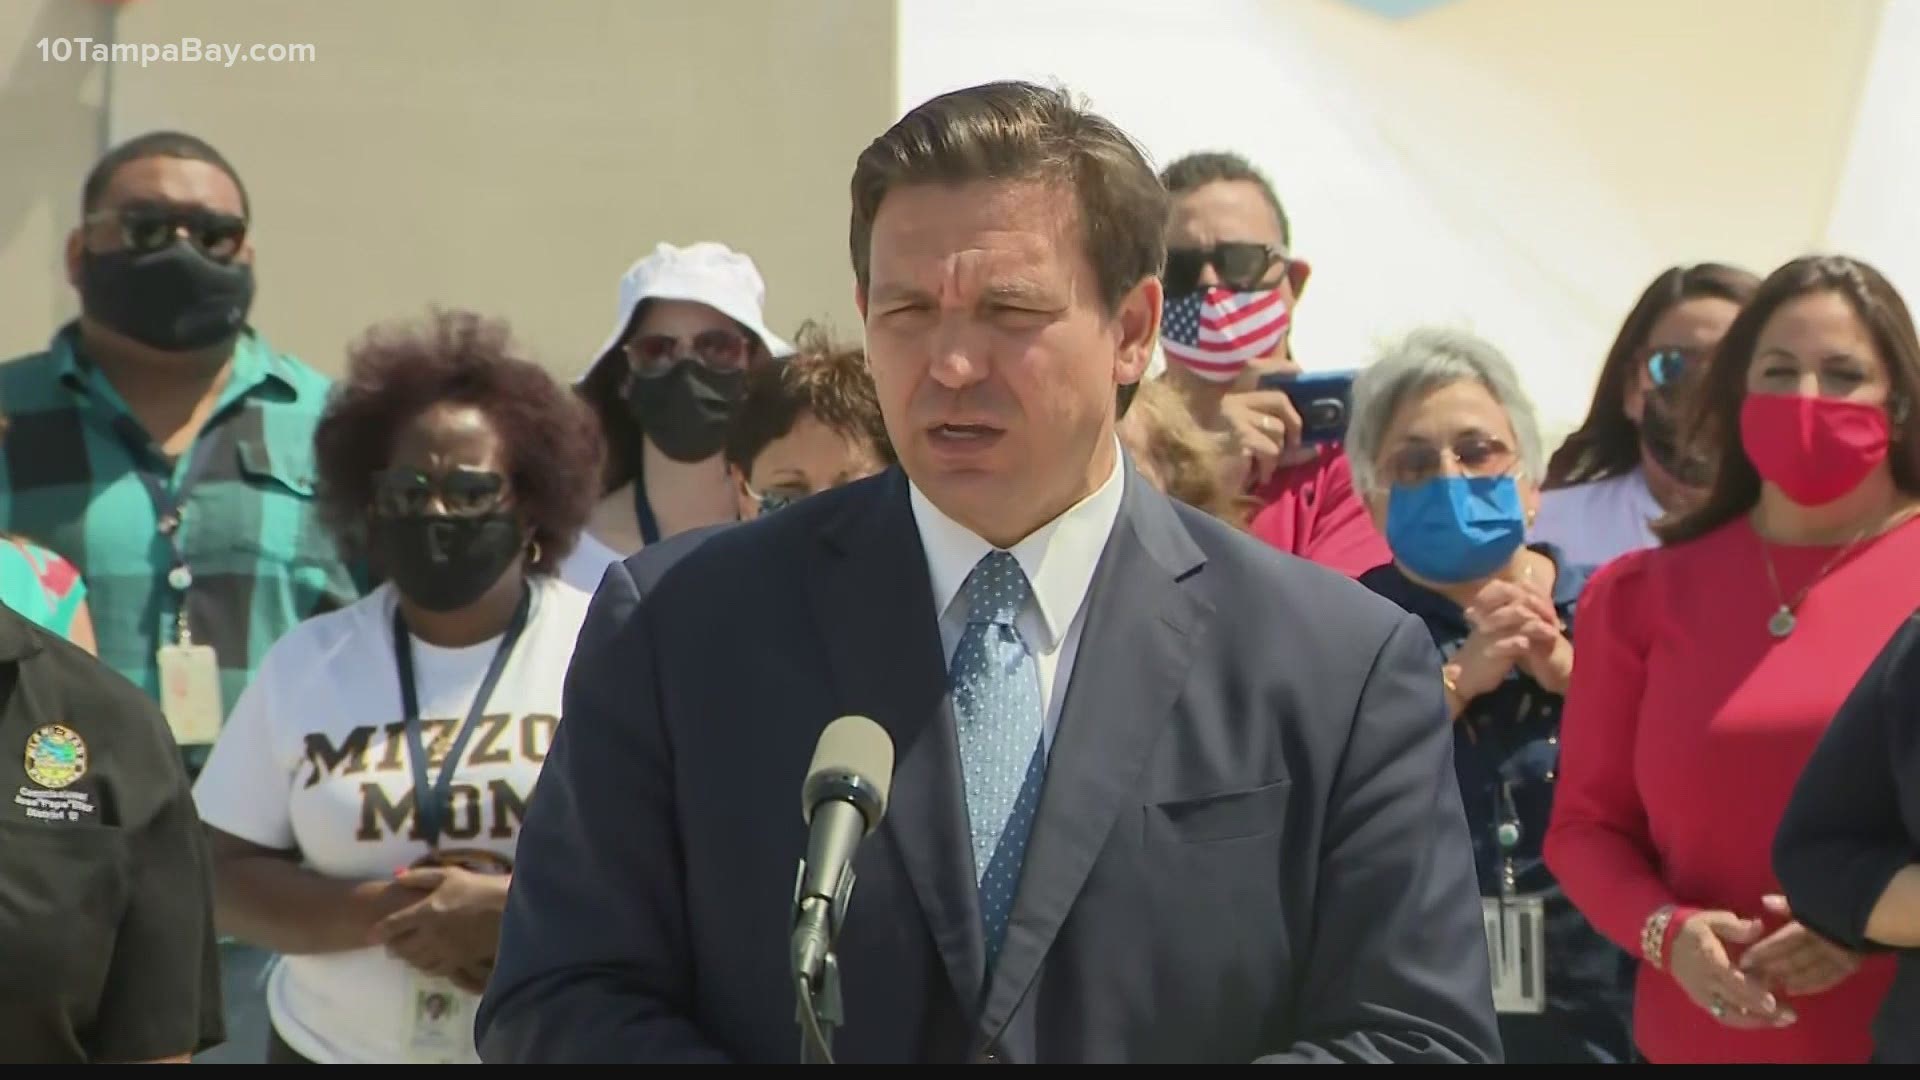 DeSantis said the tens of thousands of Floridians who are out of work due to the closure of the industry have suffered for too long.